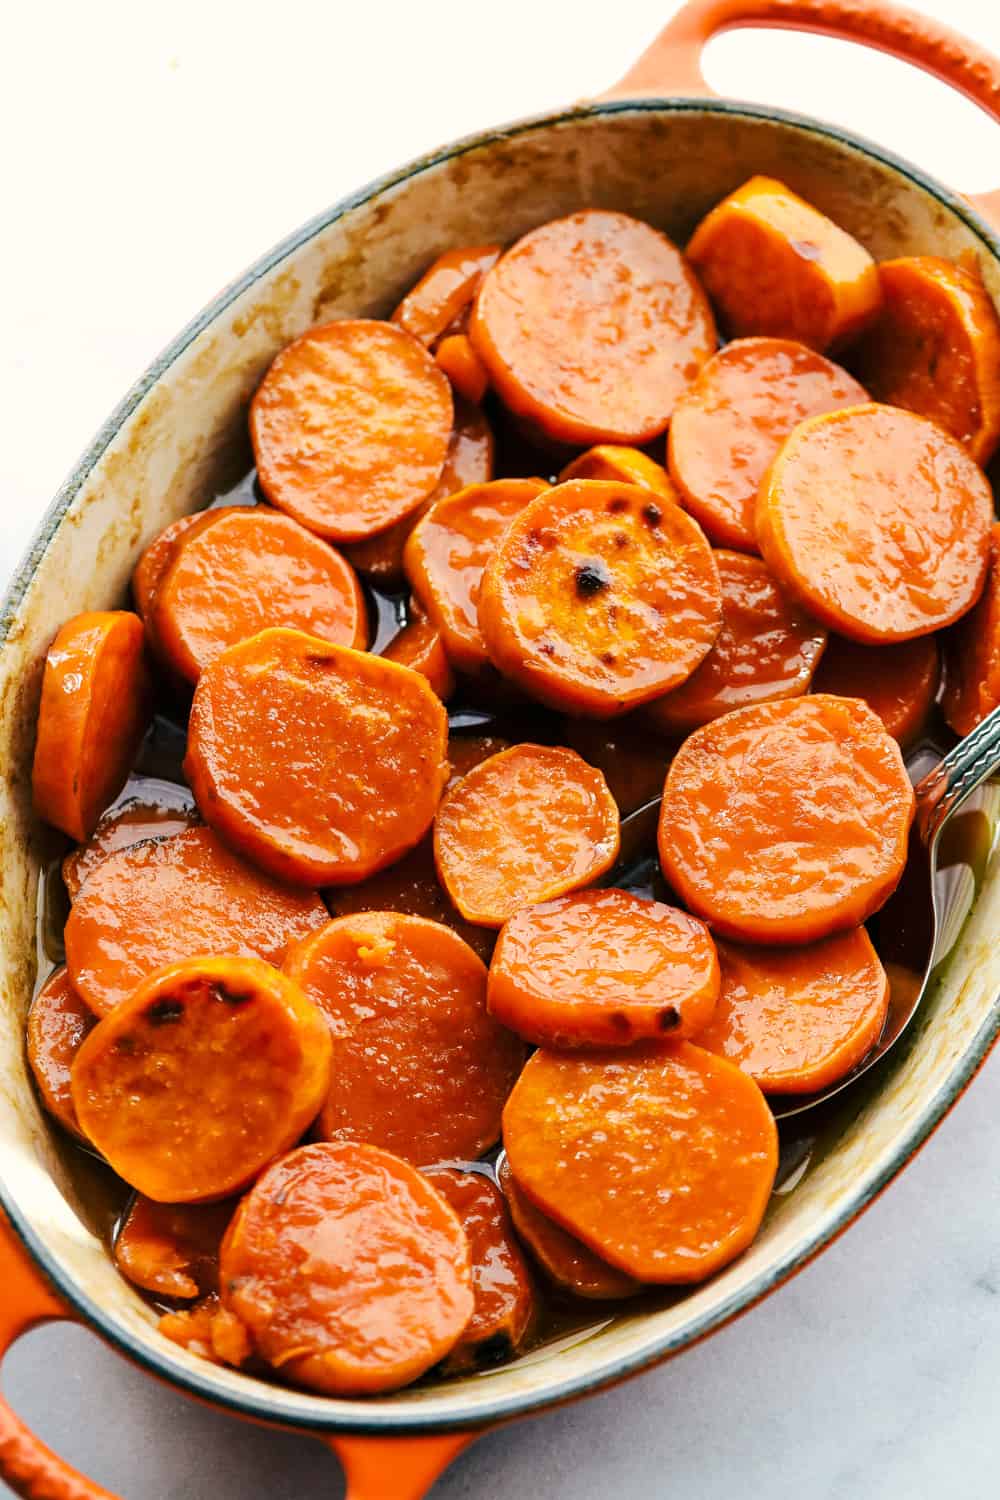 Candied sweet potatoes baked